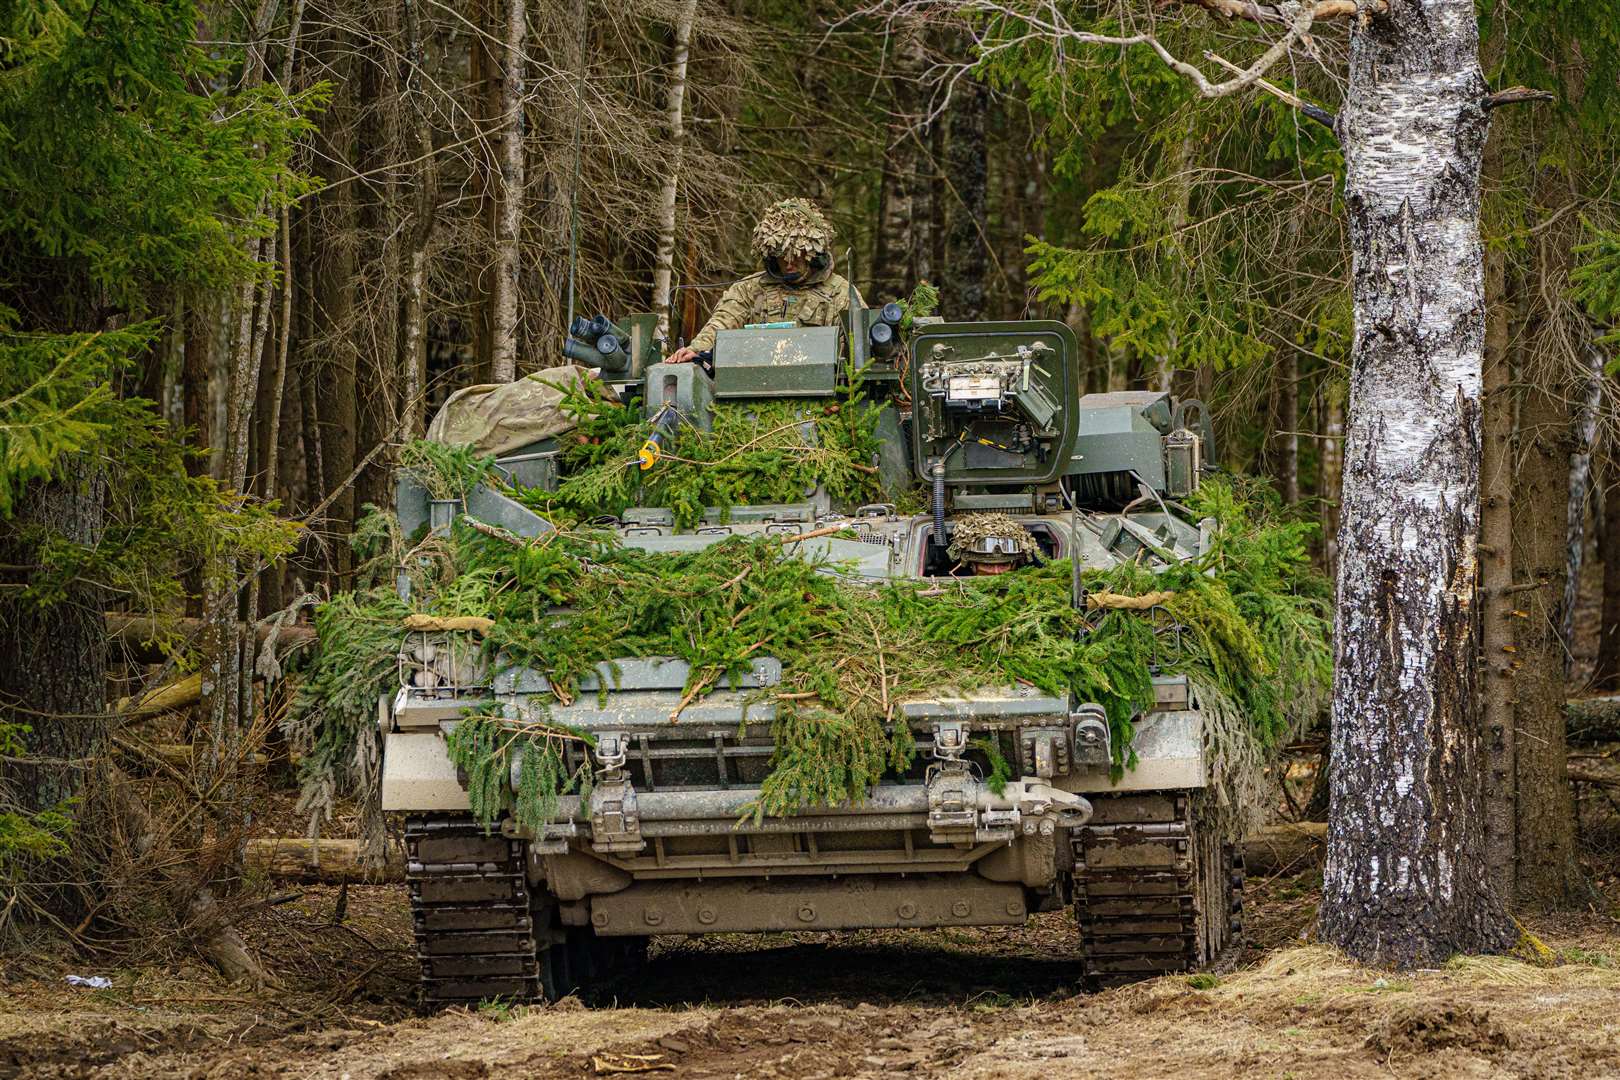 British soldiers on manoeuvres in the Tapa central military training area in Estonia during a Nato exercise (Ben Birchall/PA)